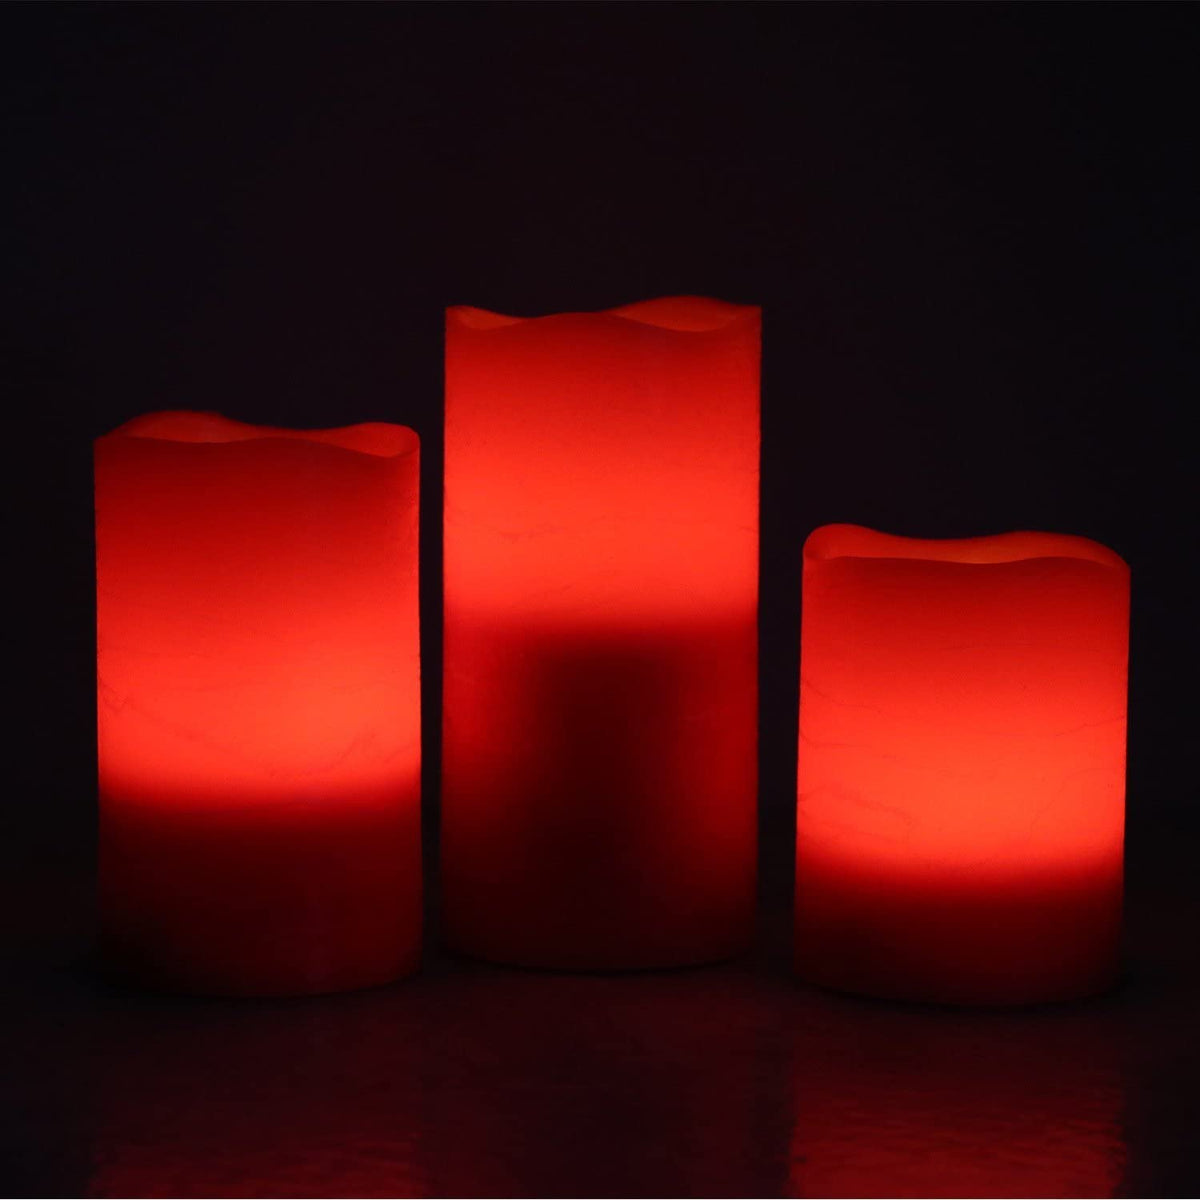 Adoria Flameless LED Color-Changing Scented Candles with Timer Function, Warm White Flickering Light, Real Wax Finish, Battery Operated  - Set of 3